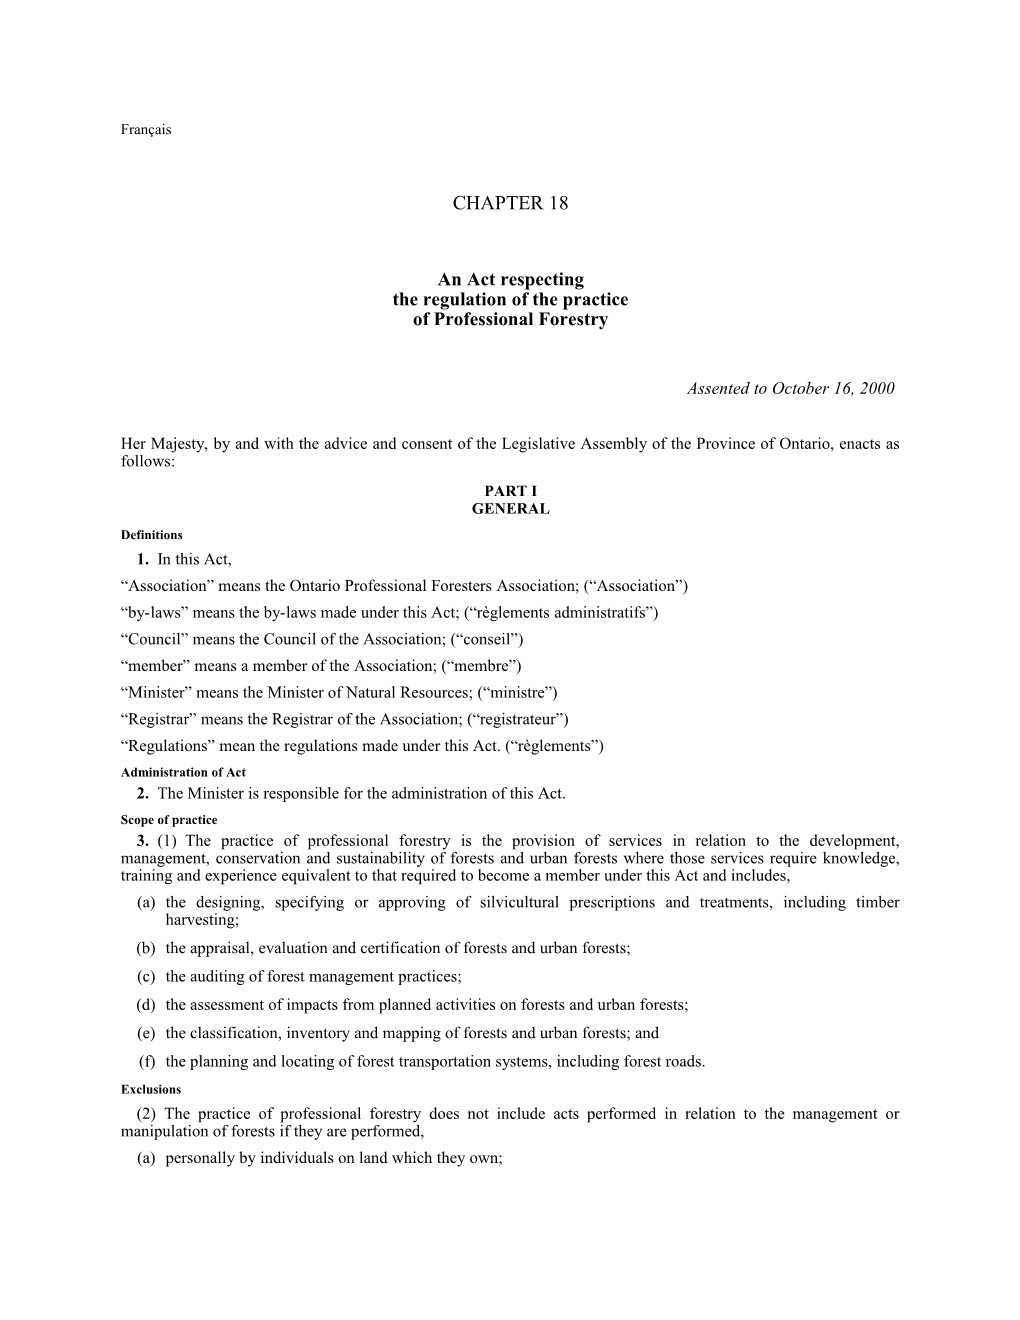 Professional Foresters Act, 2000, S.O. 2000, C. 18 - Bill 110